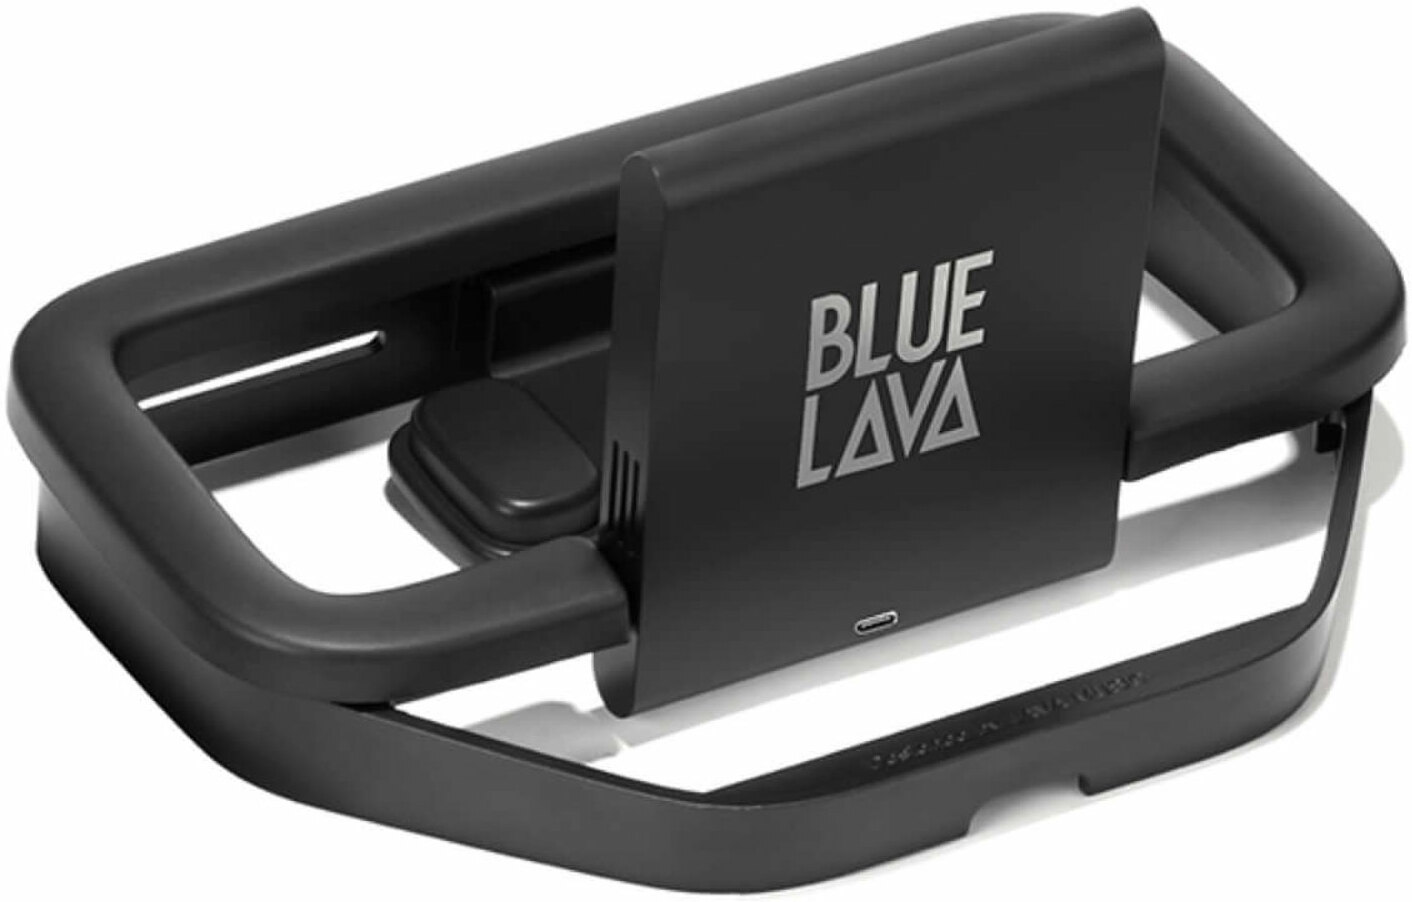 Lava Music Airflow Wireless Charger Blue Lava Guitar Stand - Pile / Accu / Batterie - Main picture